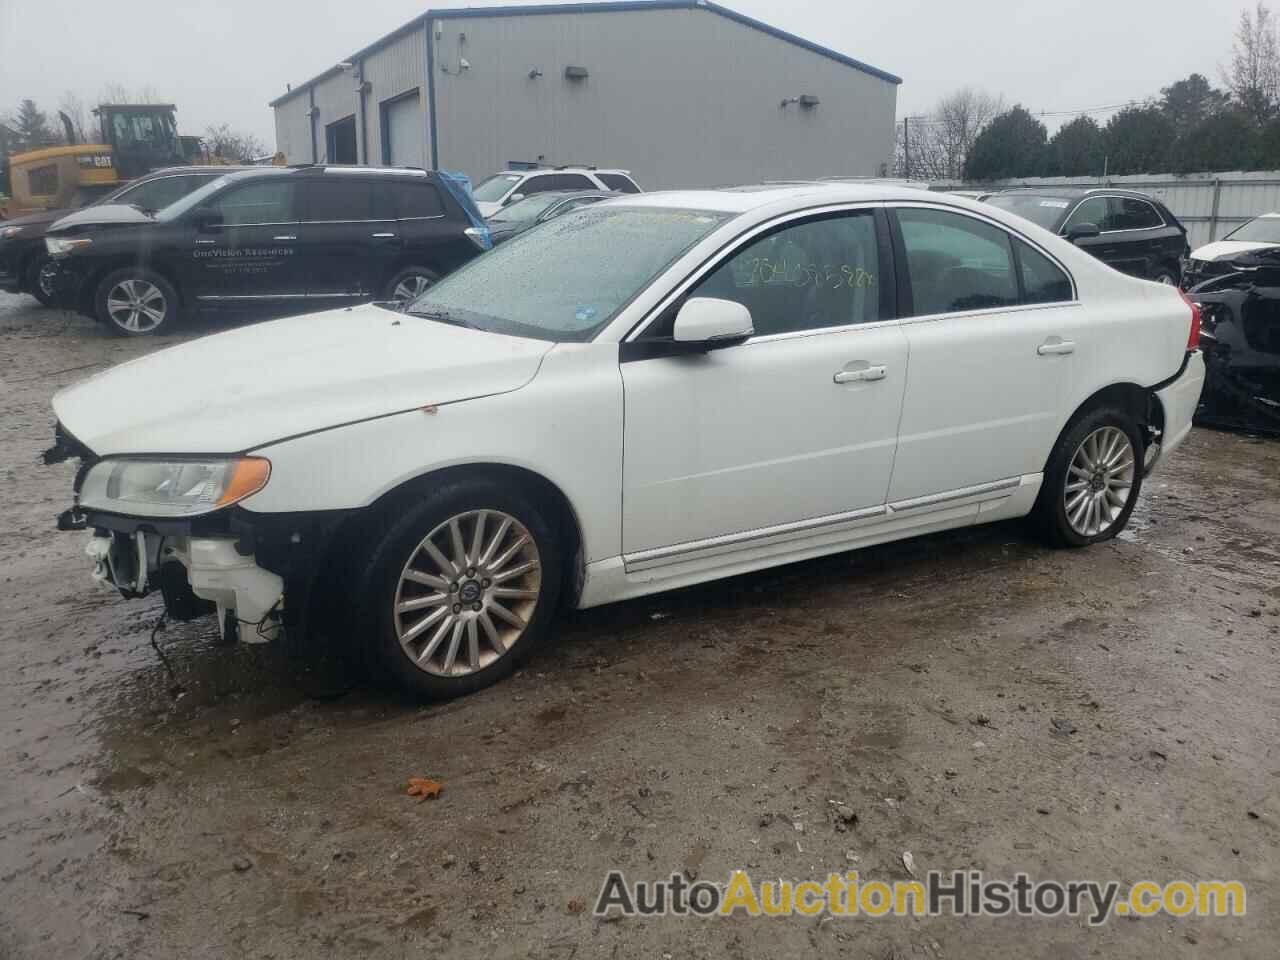 2012 VOLVO S80 3.2, YV1940AS5C1163098